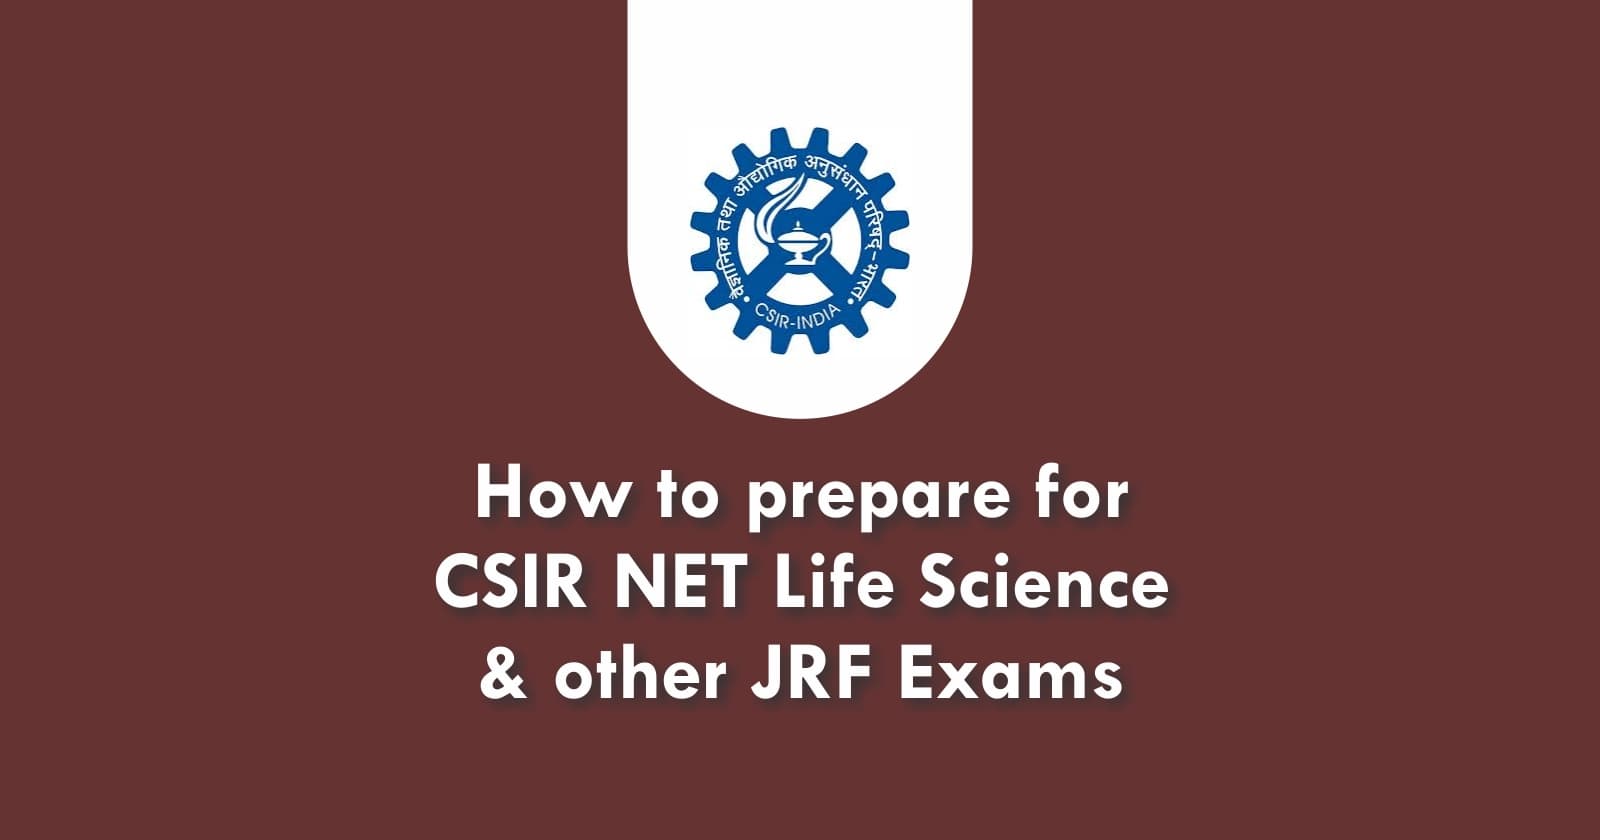 How to prepare for CSIR NET Life Science and other JRF Exams